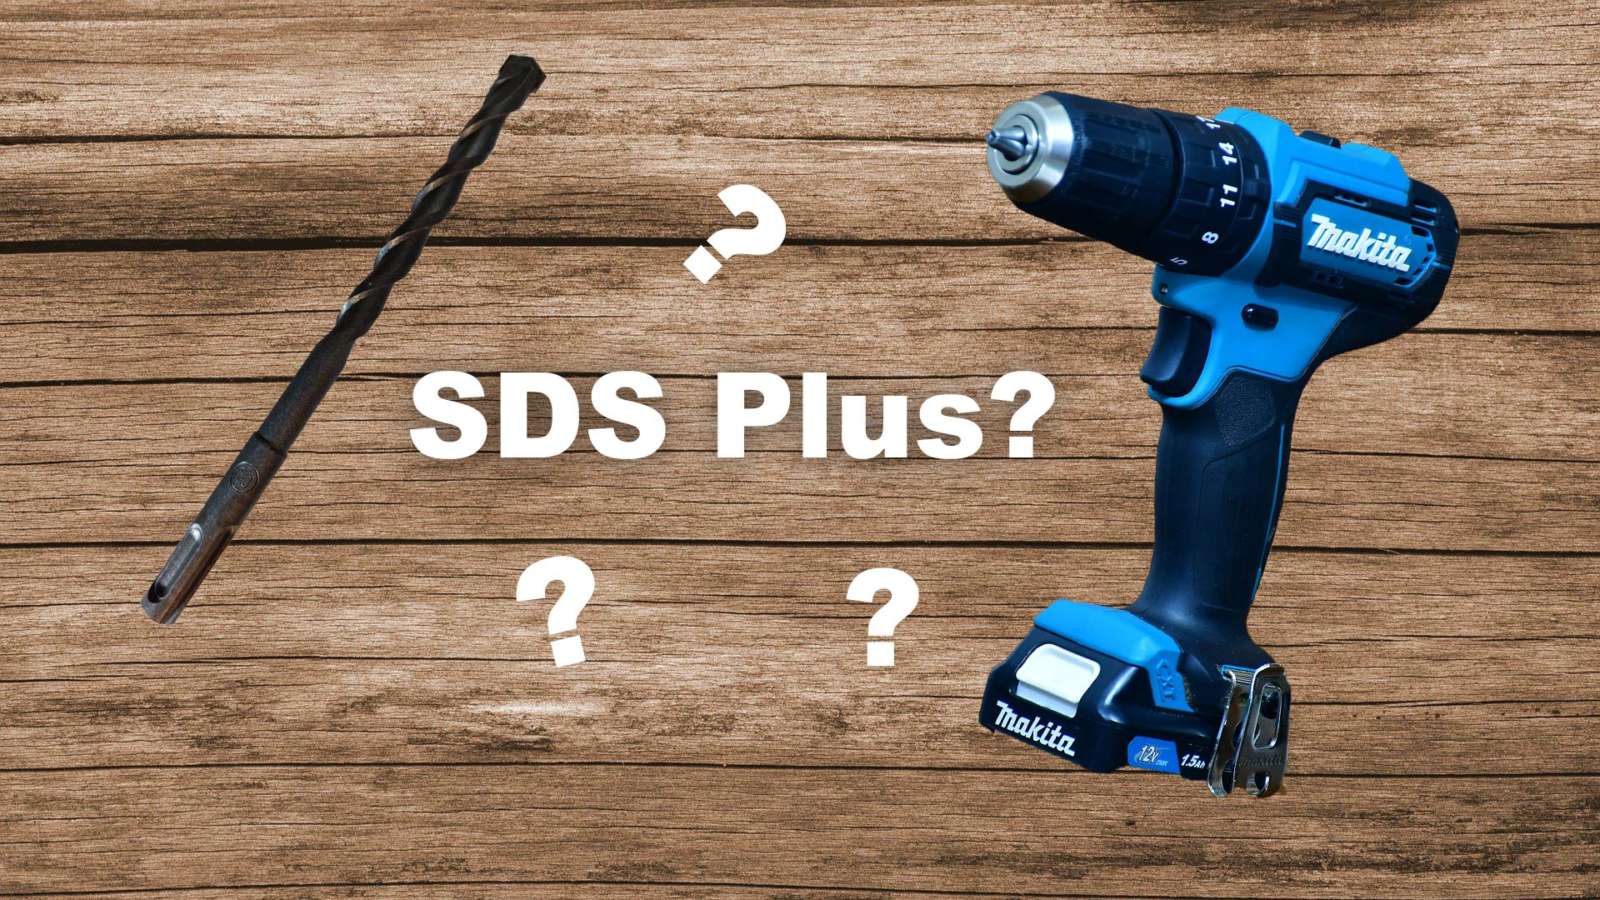 can I use hammer drill bits in normal drill? 2